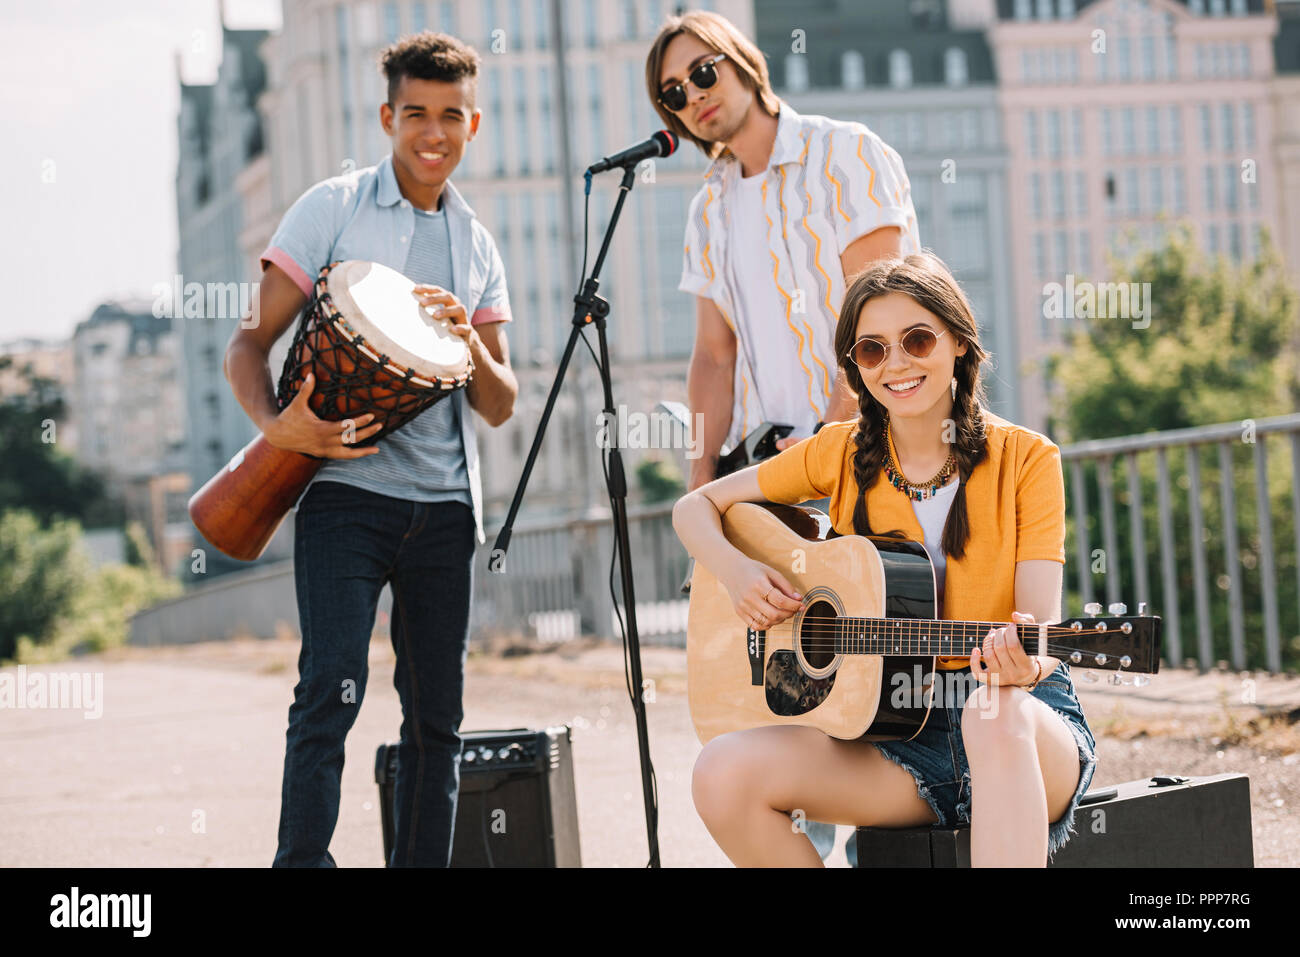 Multiracial young people performing on guitars and djembe on street Stock Photo